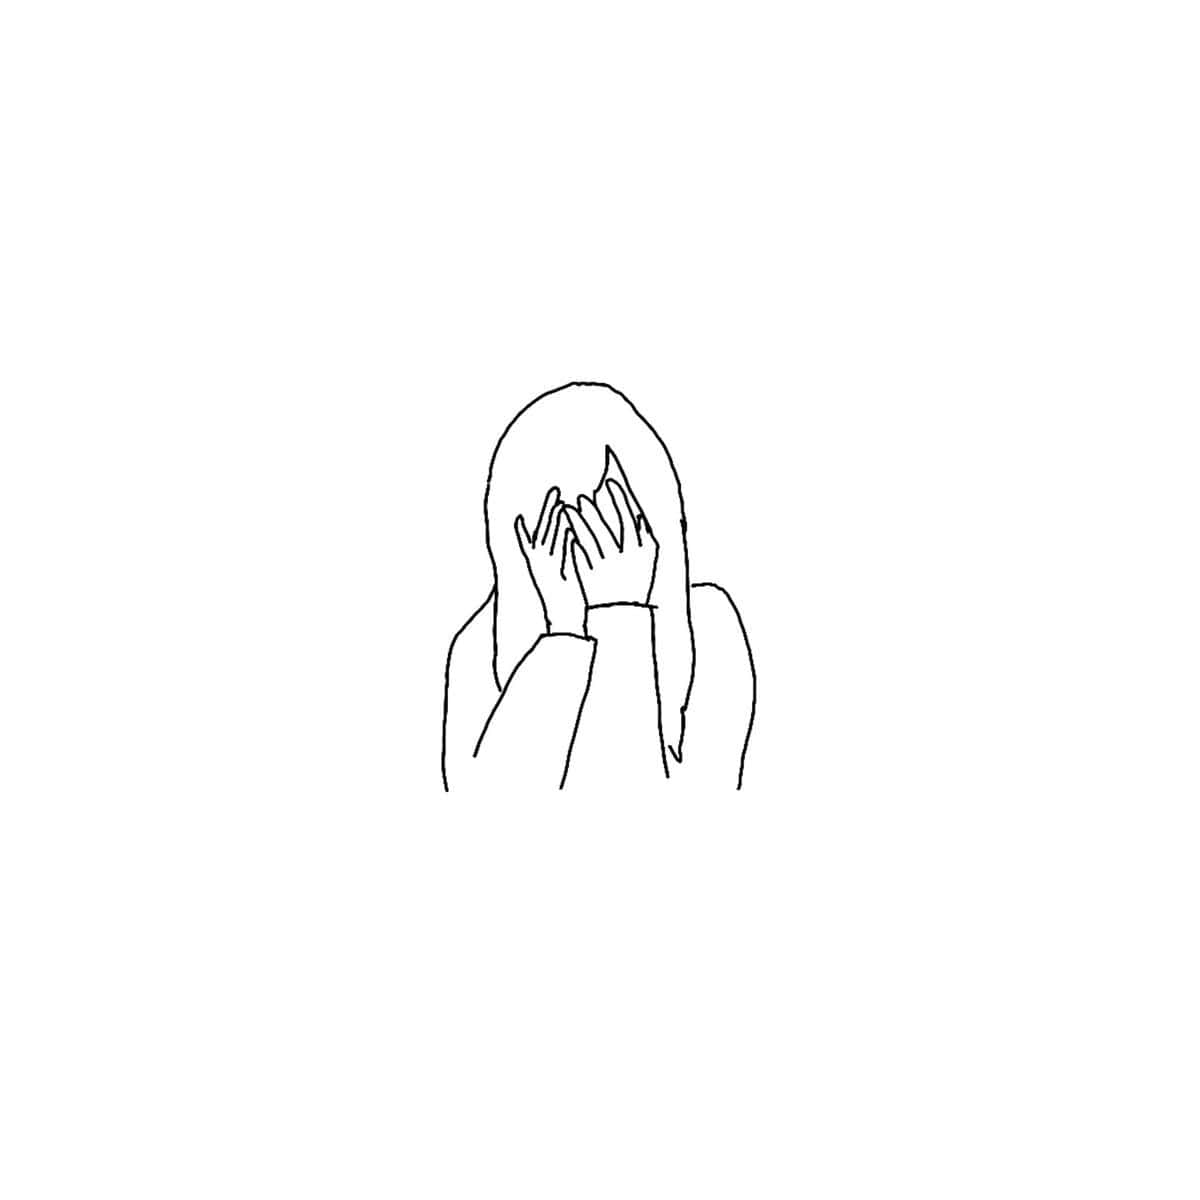 Sadness Woman Crying Sketch Art Picture